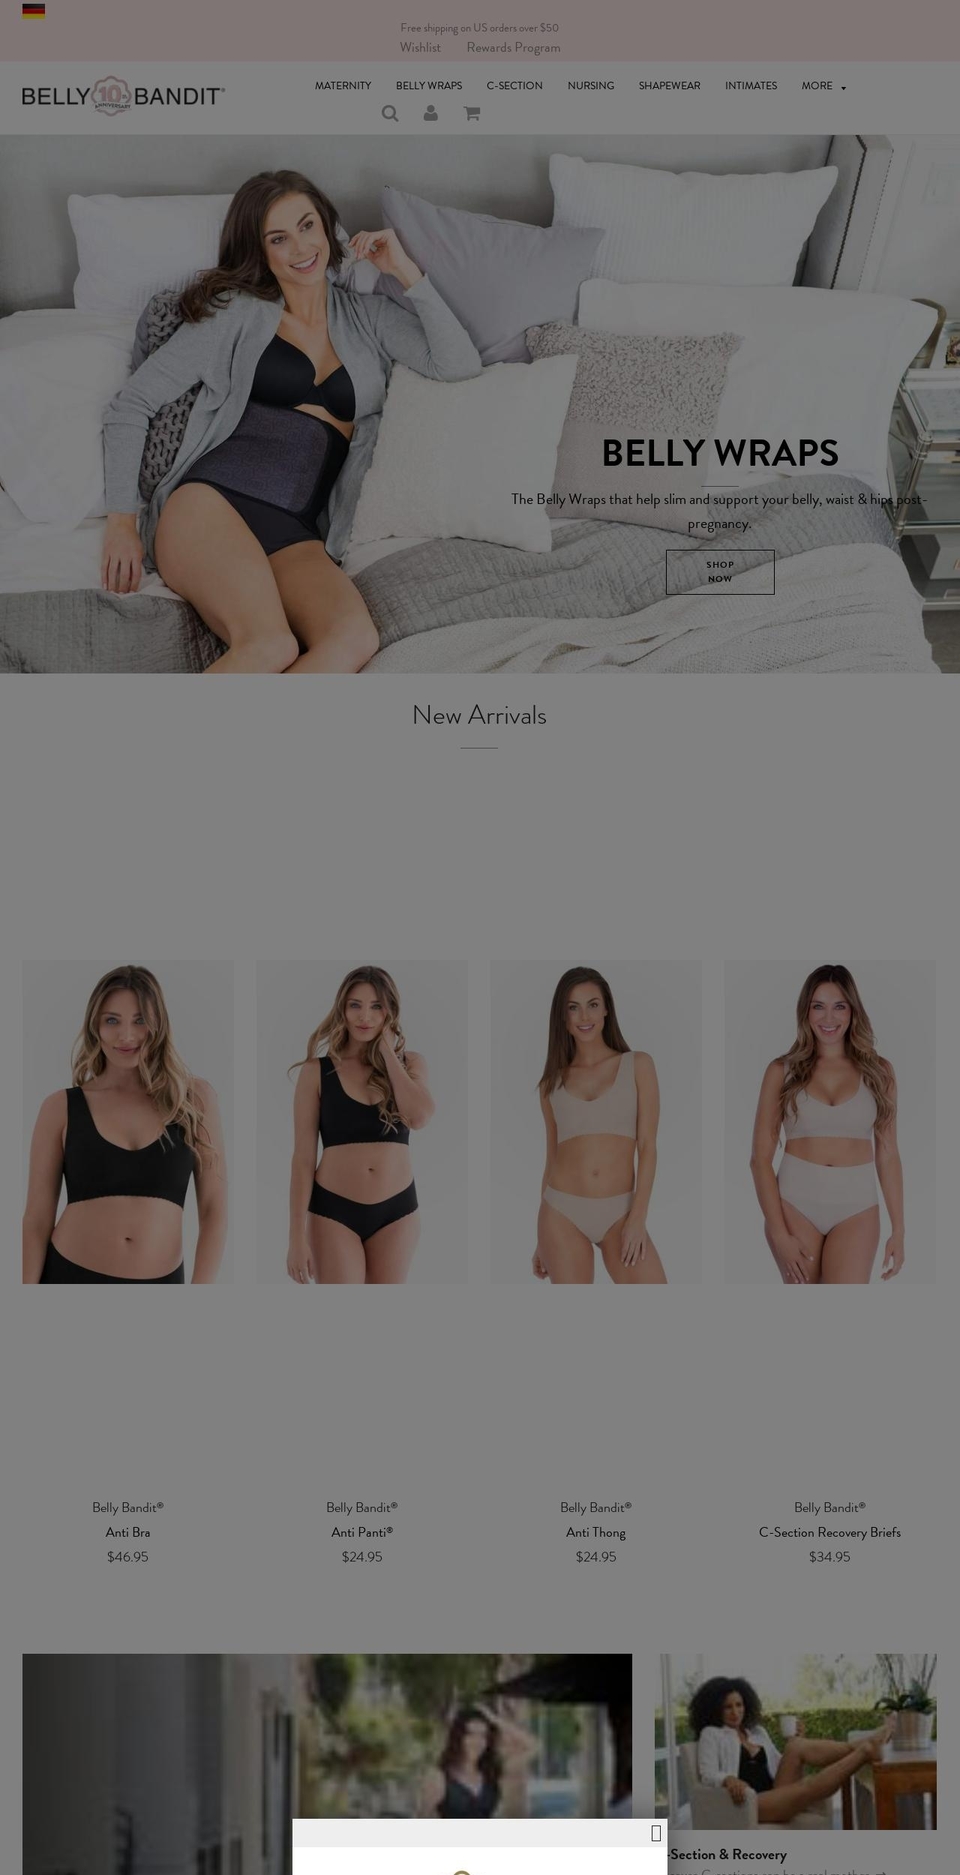 Copy of Flow Shopify theme site example bellybanditbellywrap.com